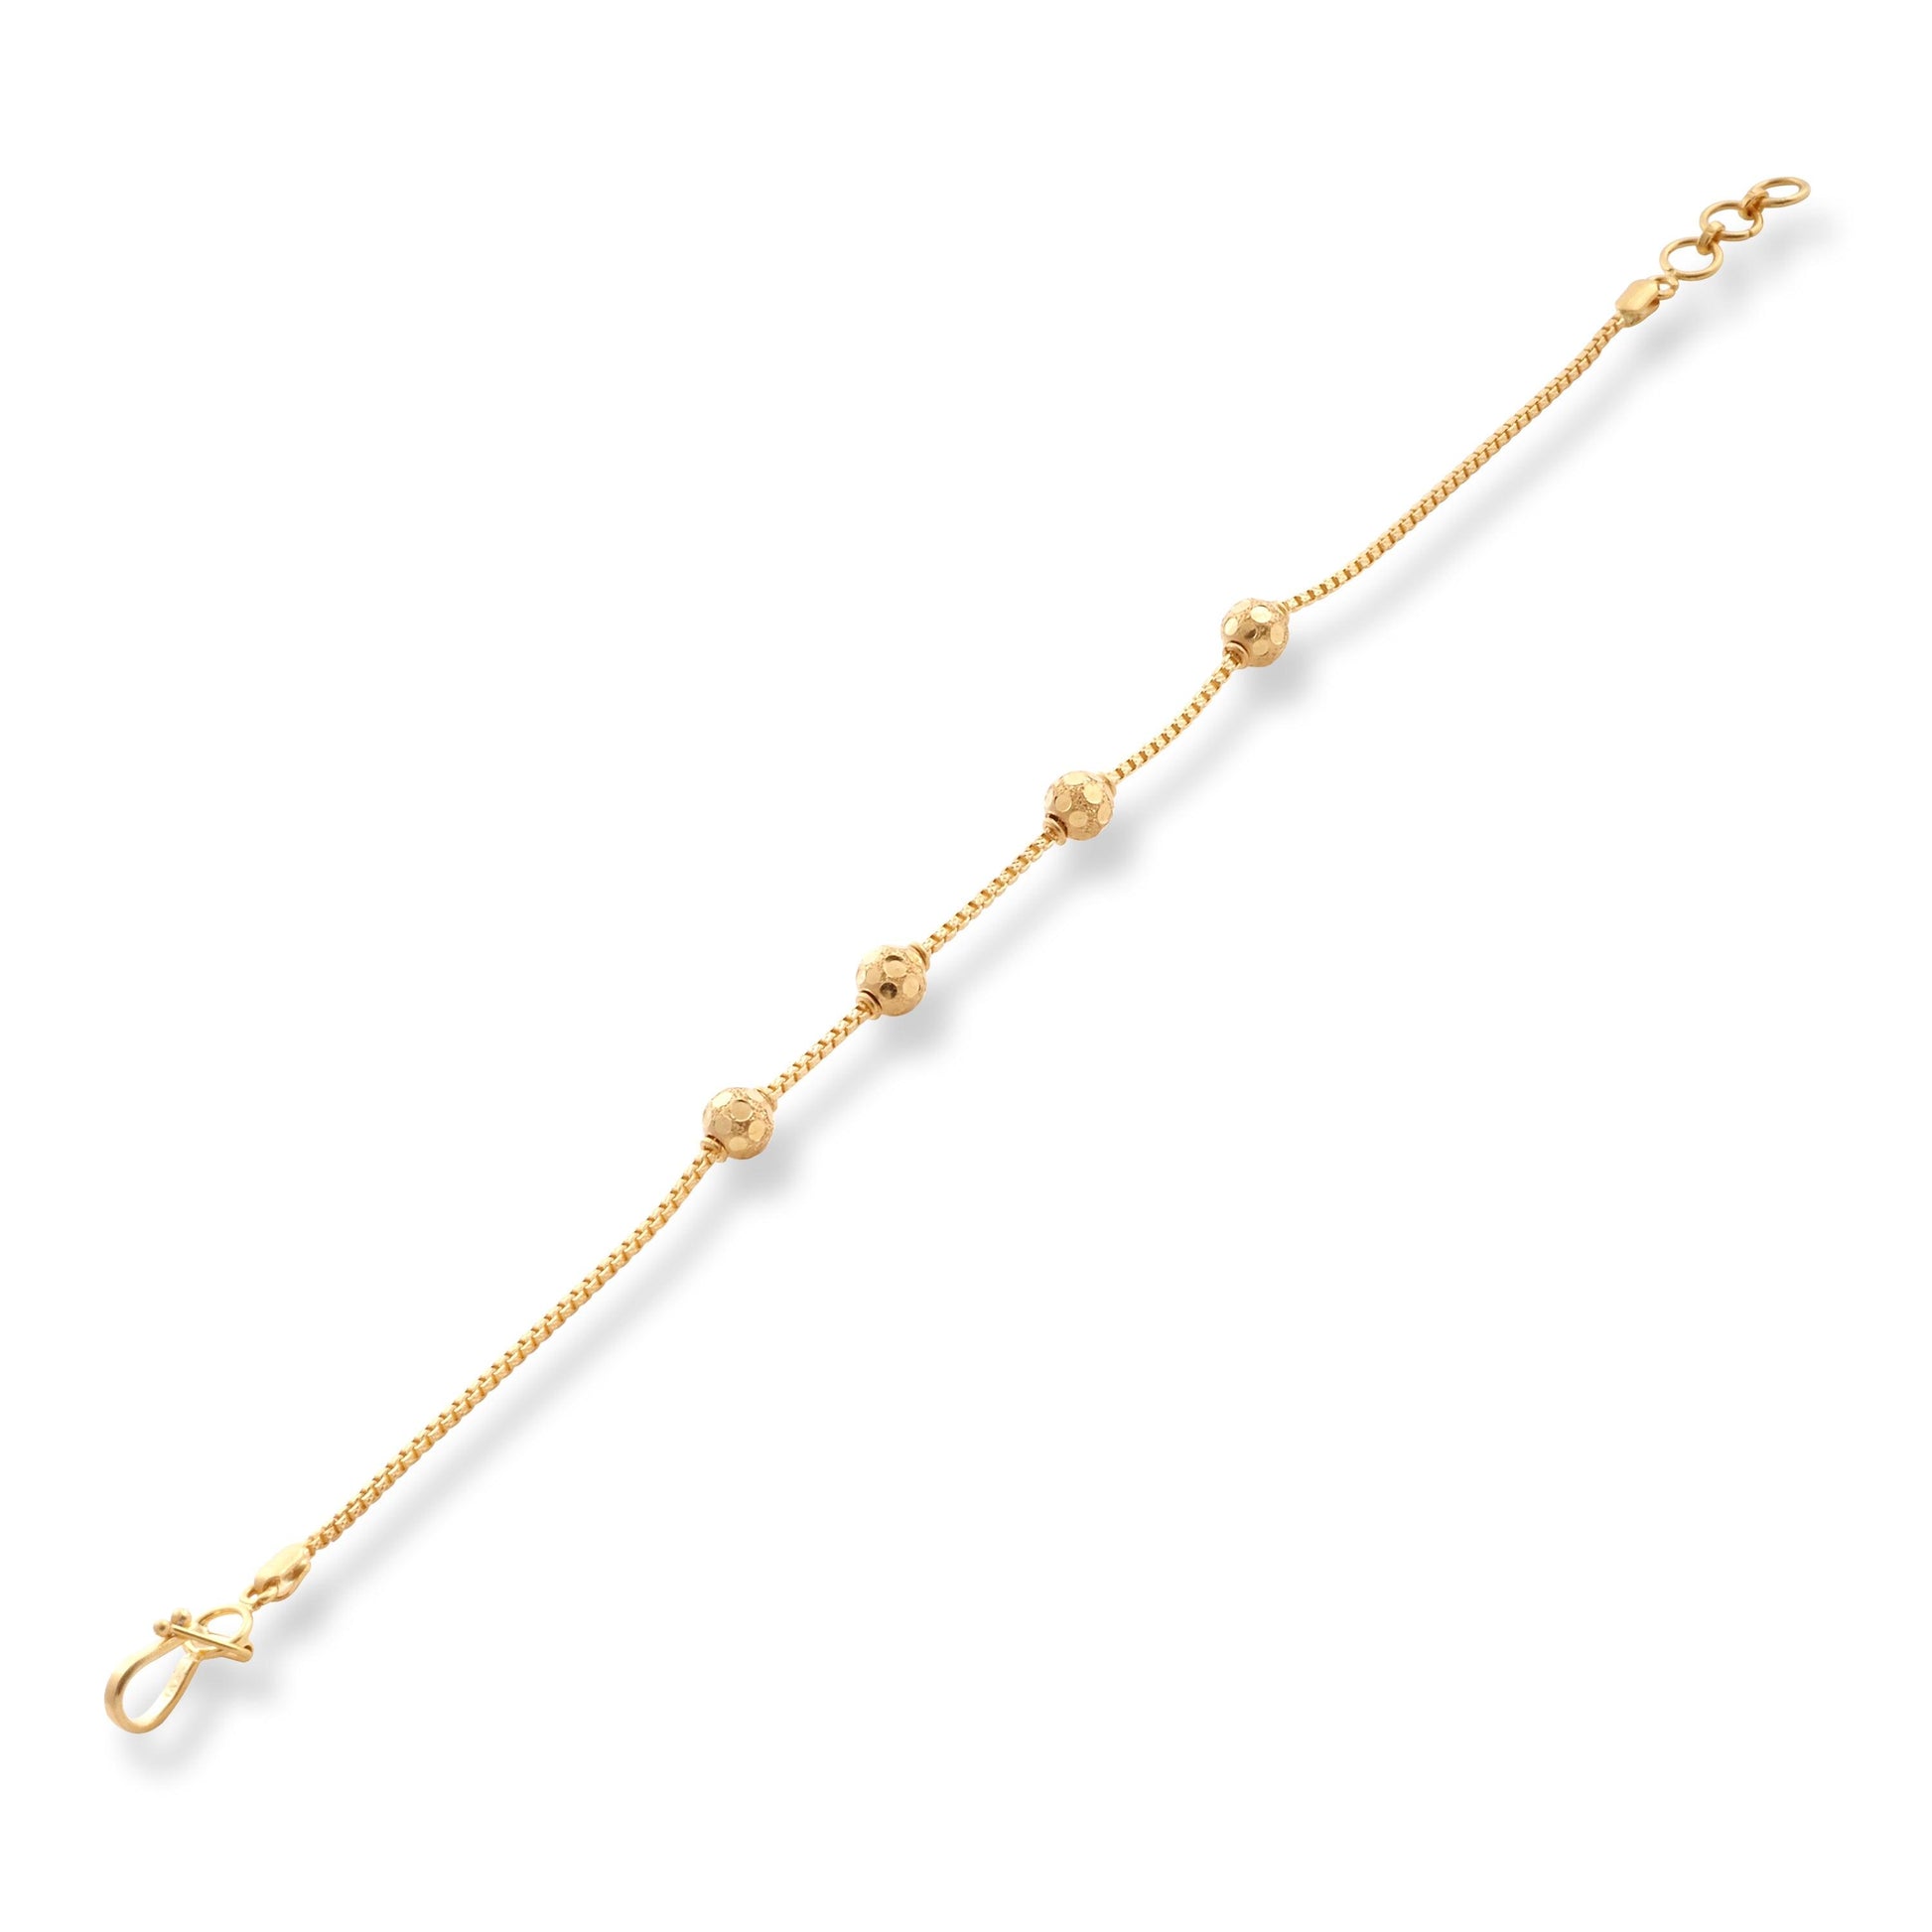 22ct Yellow Gold Bracelet in Diamond Cutting Beads Design with Hook Clasp LBR-8516 - Minar Jewellers